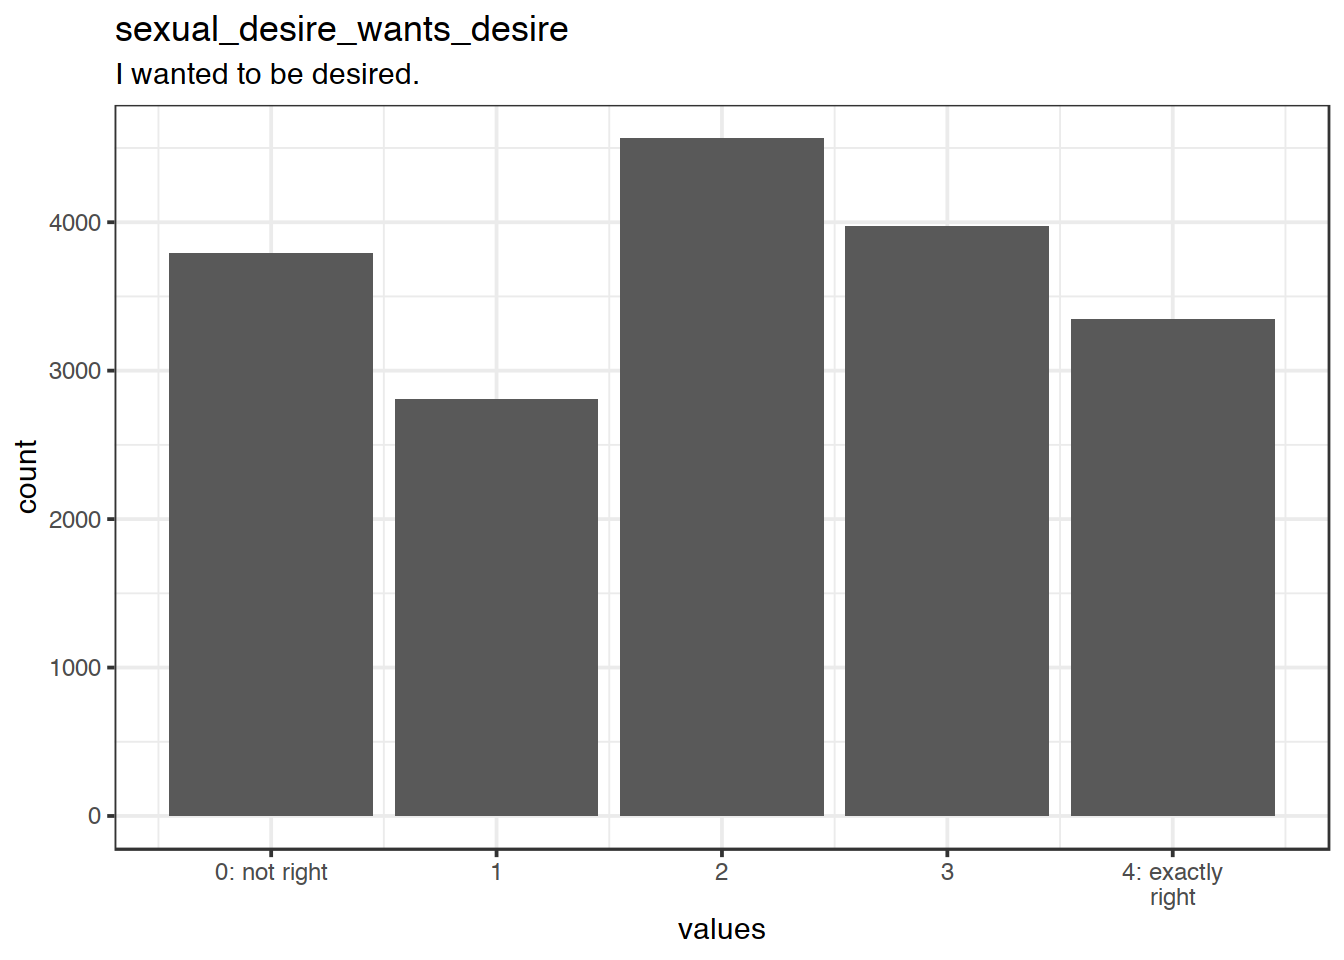 Distribution of values for sexual_desire_wants_desire